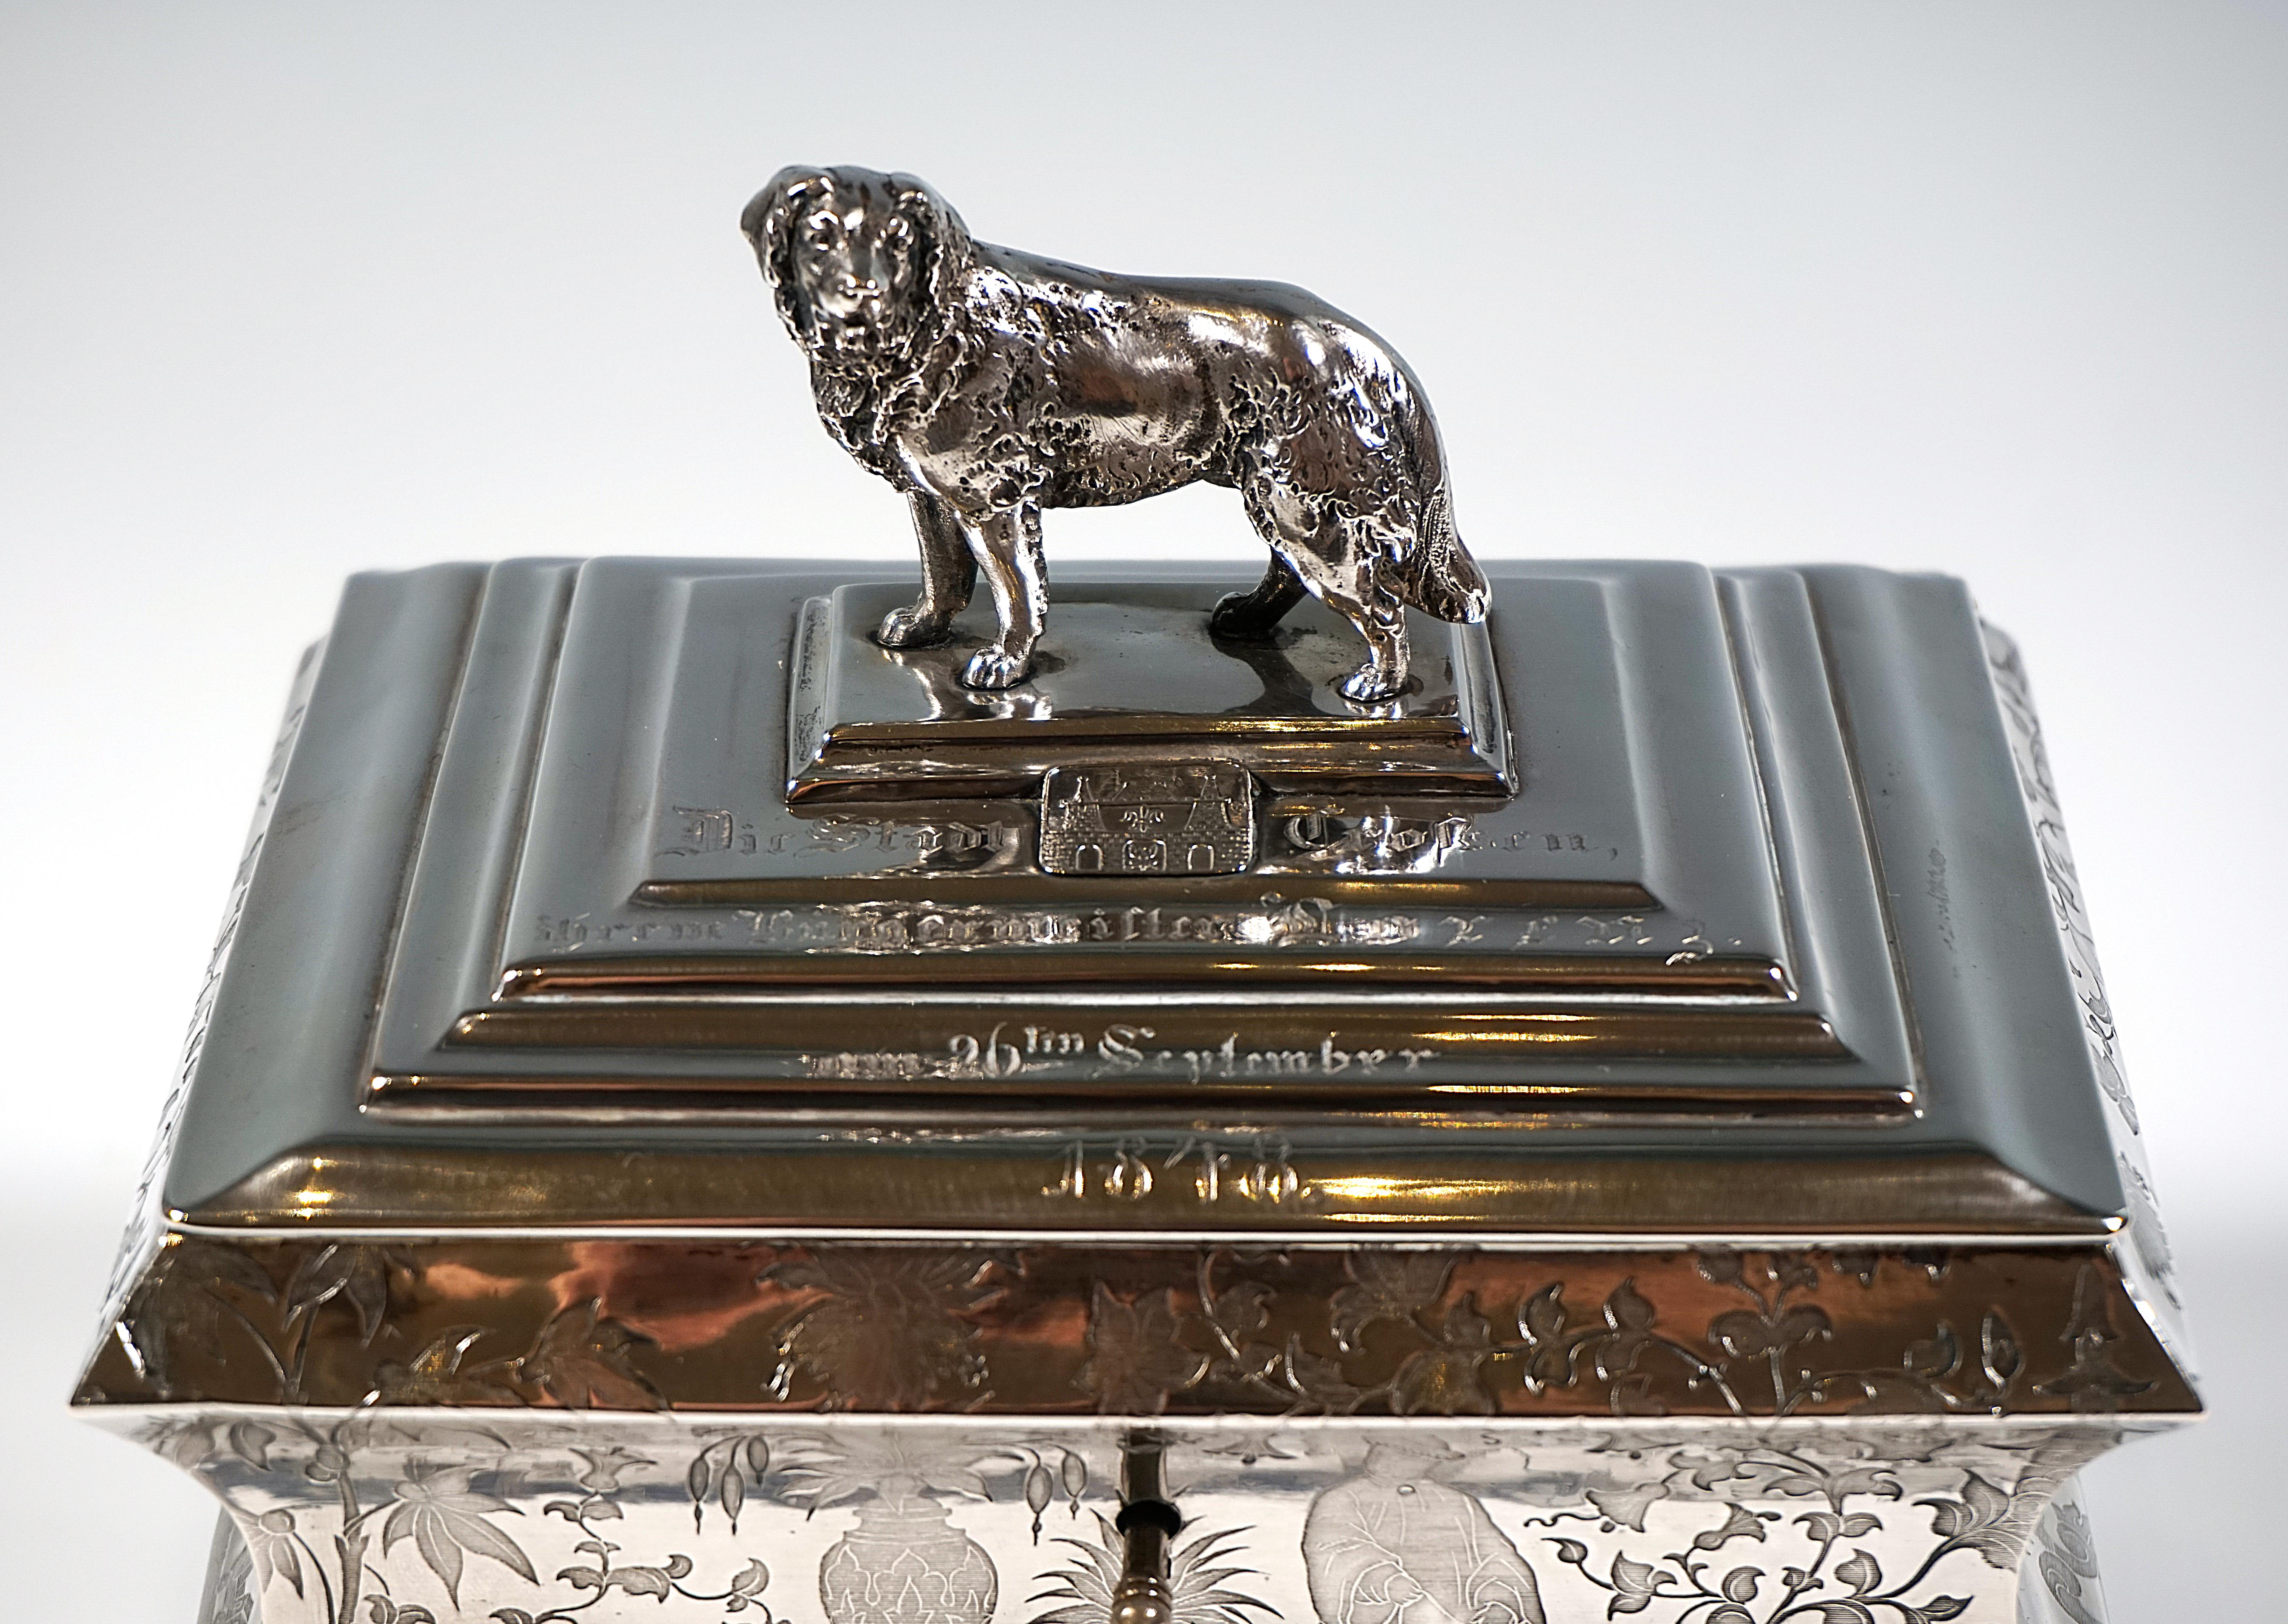 Hand-Crafted Late Biedermeier Silver Sugar Box With Chinoiseries And Dog Knob, Germany, 1848